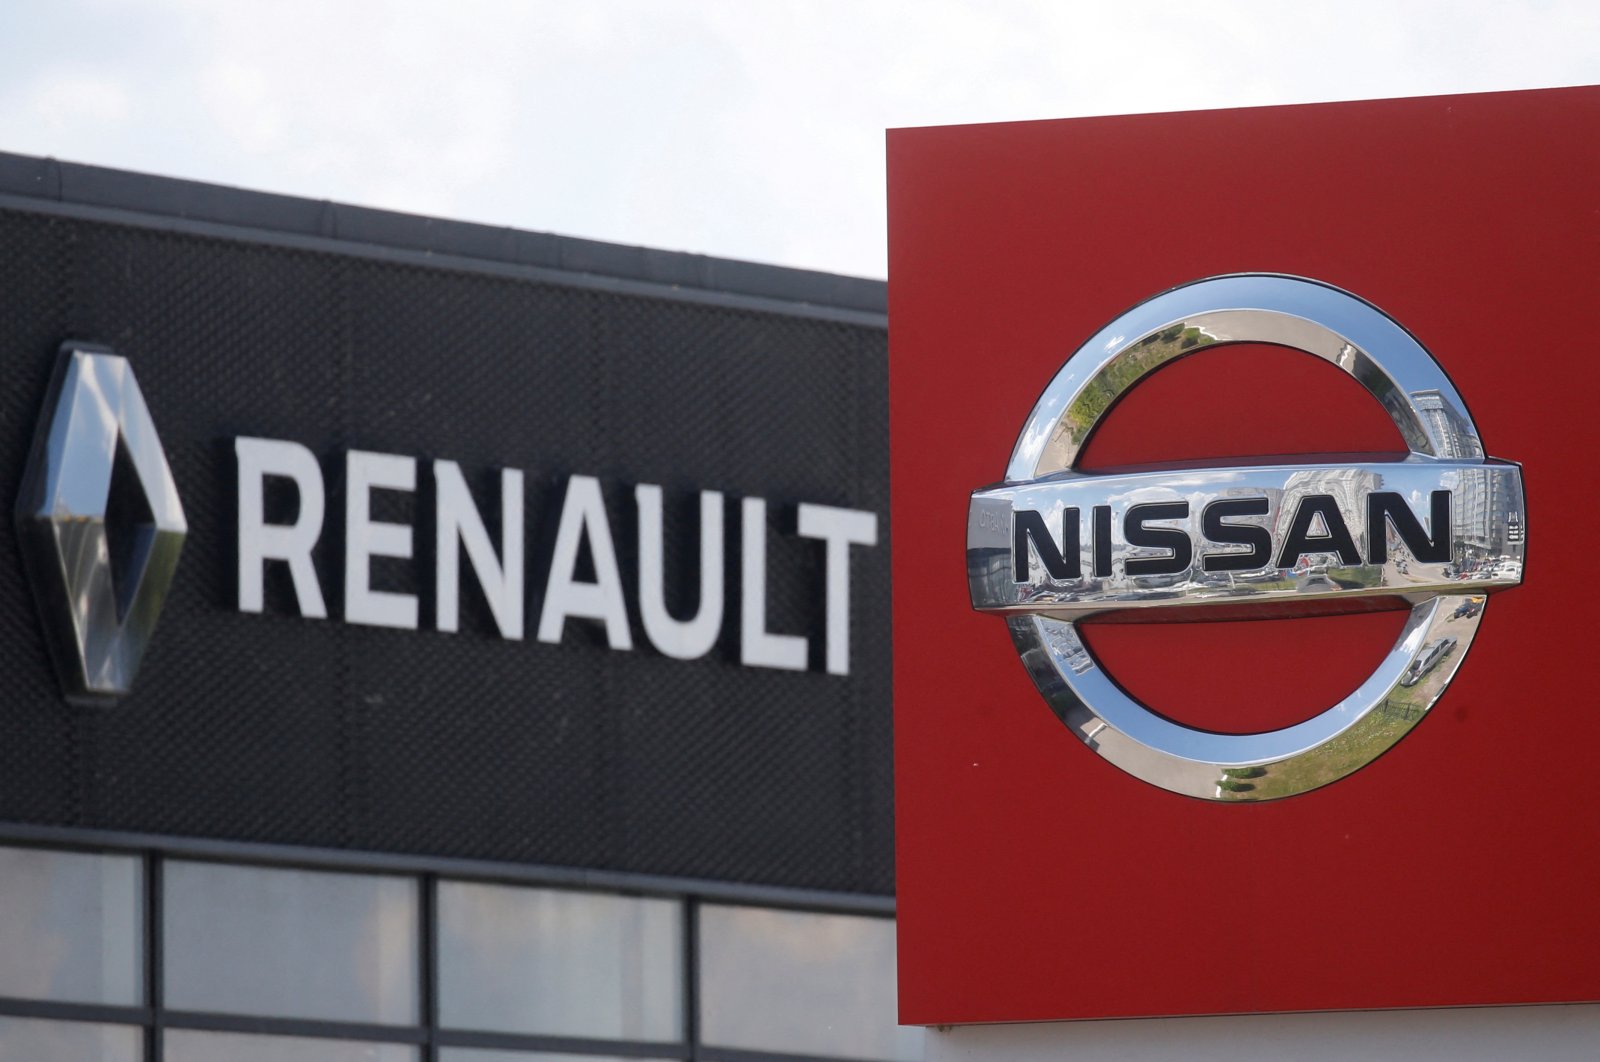 The logos of car manufacturers Renault and Nissan are pictured at a dealership in Kyiv, Ukraine, June 25, 2020. (Reuters Photo)